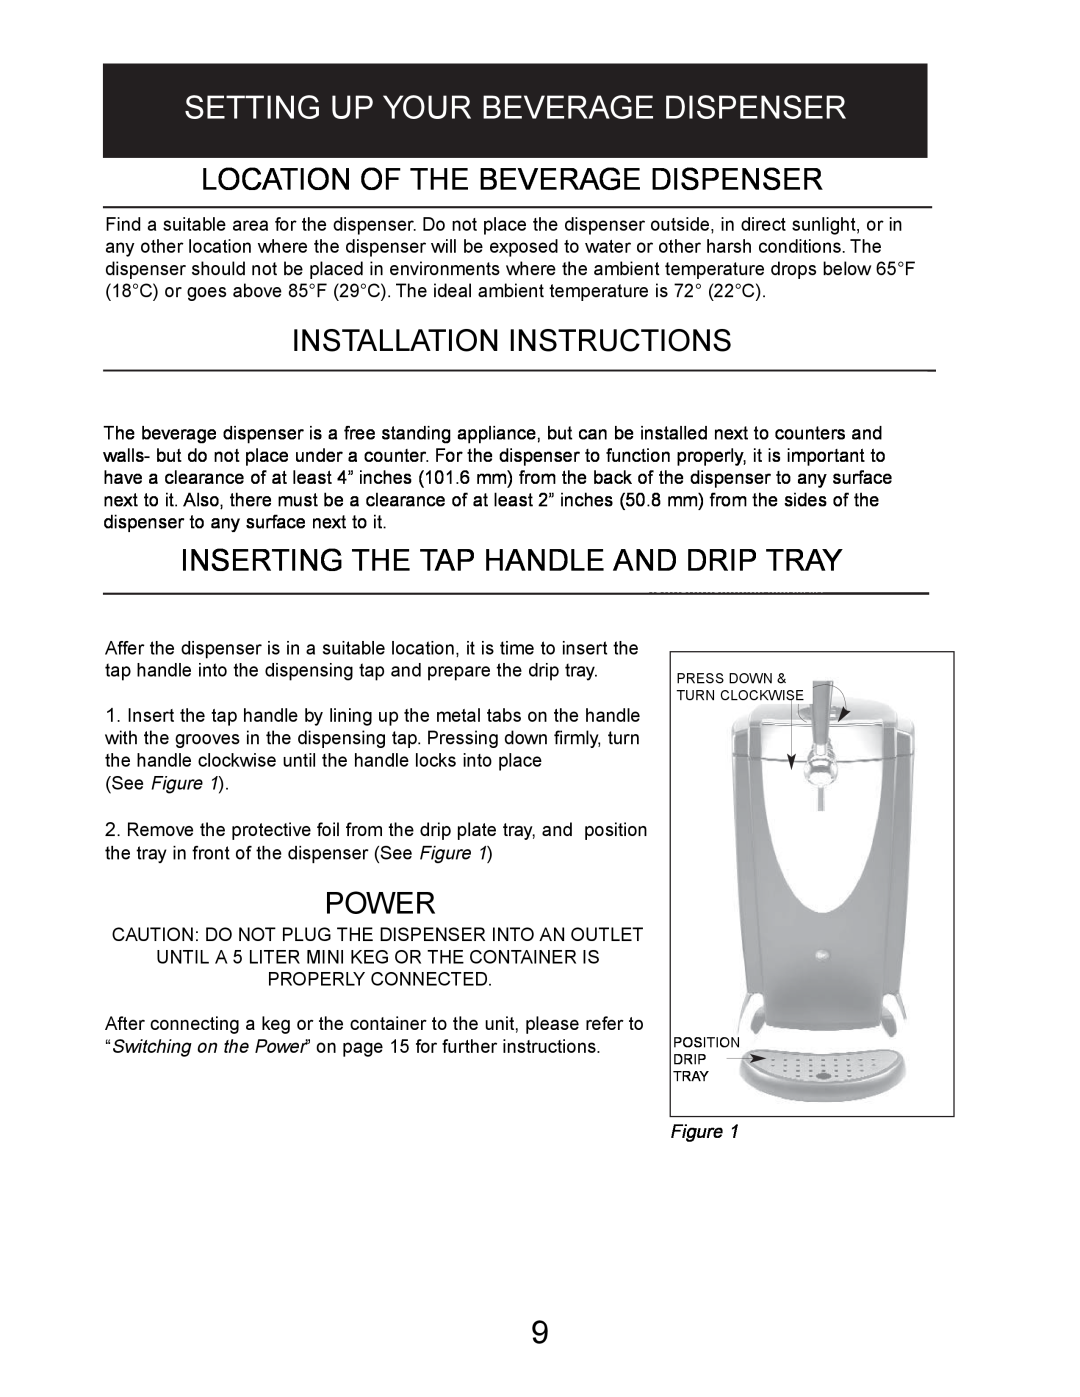 Danby DBD5L Location Of The Beverage Dispenser, Installation Instructions, Inserting The Tap Handle And Drip Tray, Power 